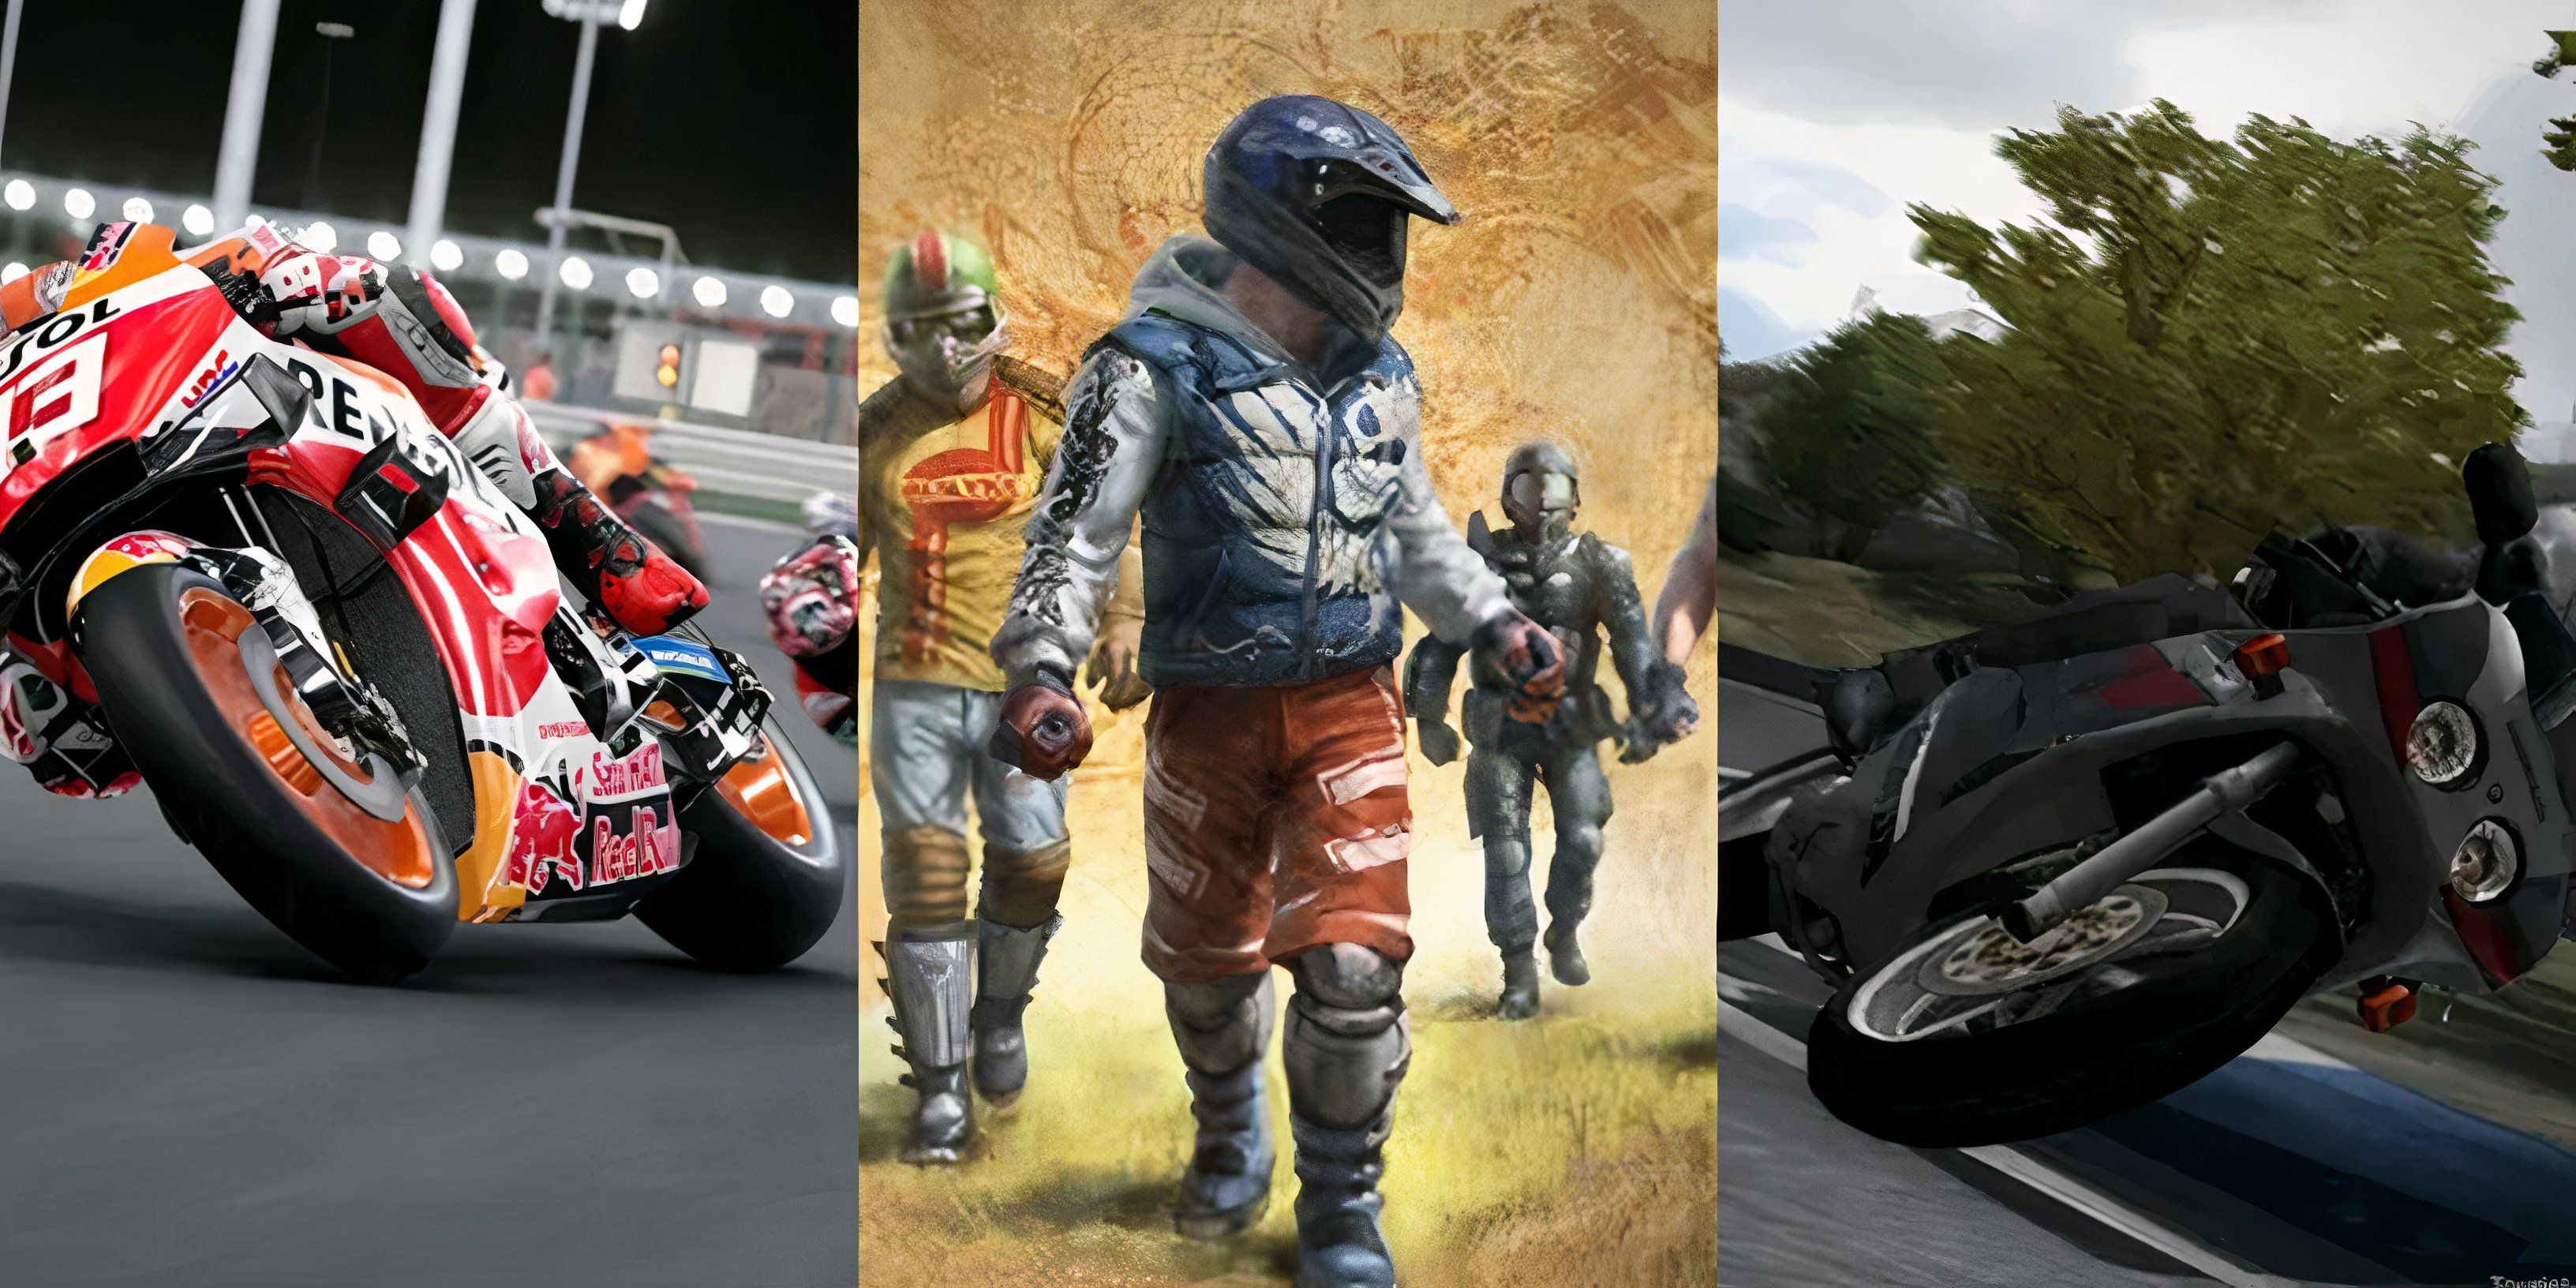 Best Motorcycle Racing Games: MotoGP 20 (left), Trials Evolution (middle), and Tourist Trophy (right)